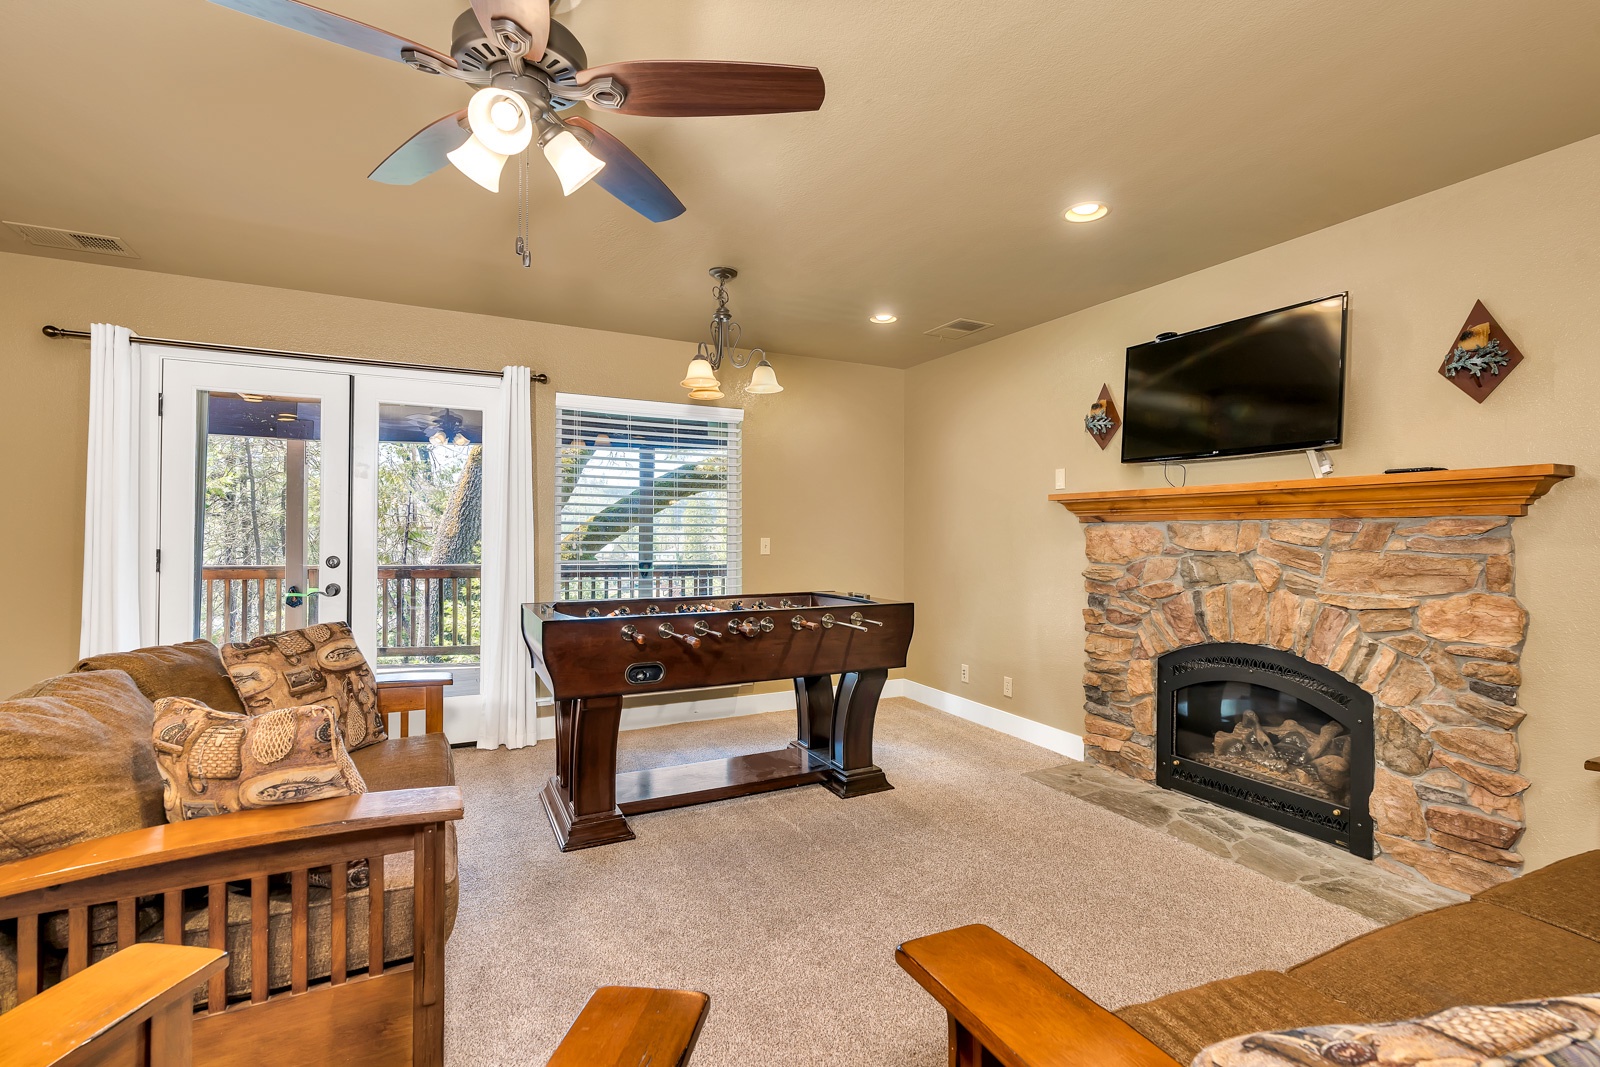 Relax with your favorite movies & shows or get competitive in the lower-level game room